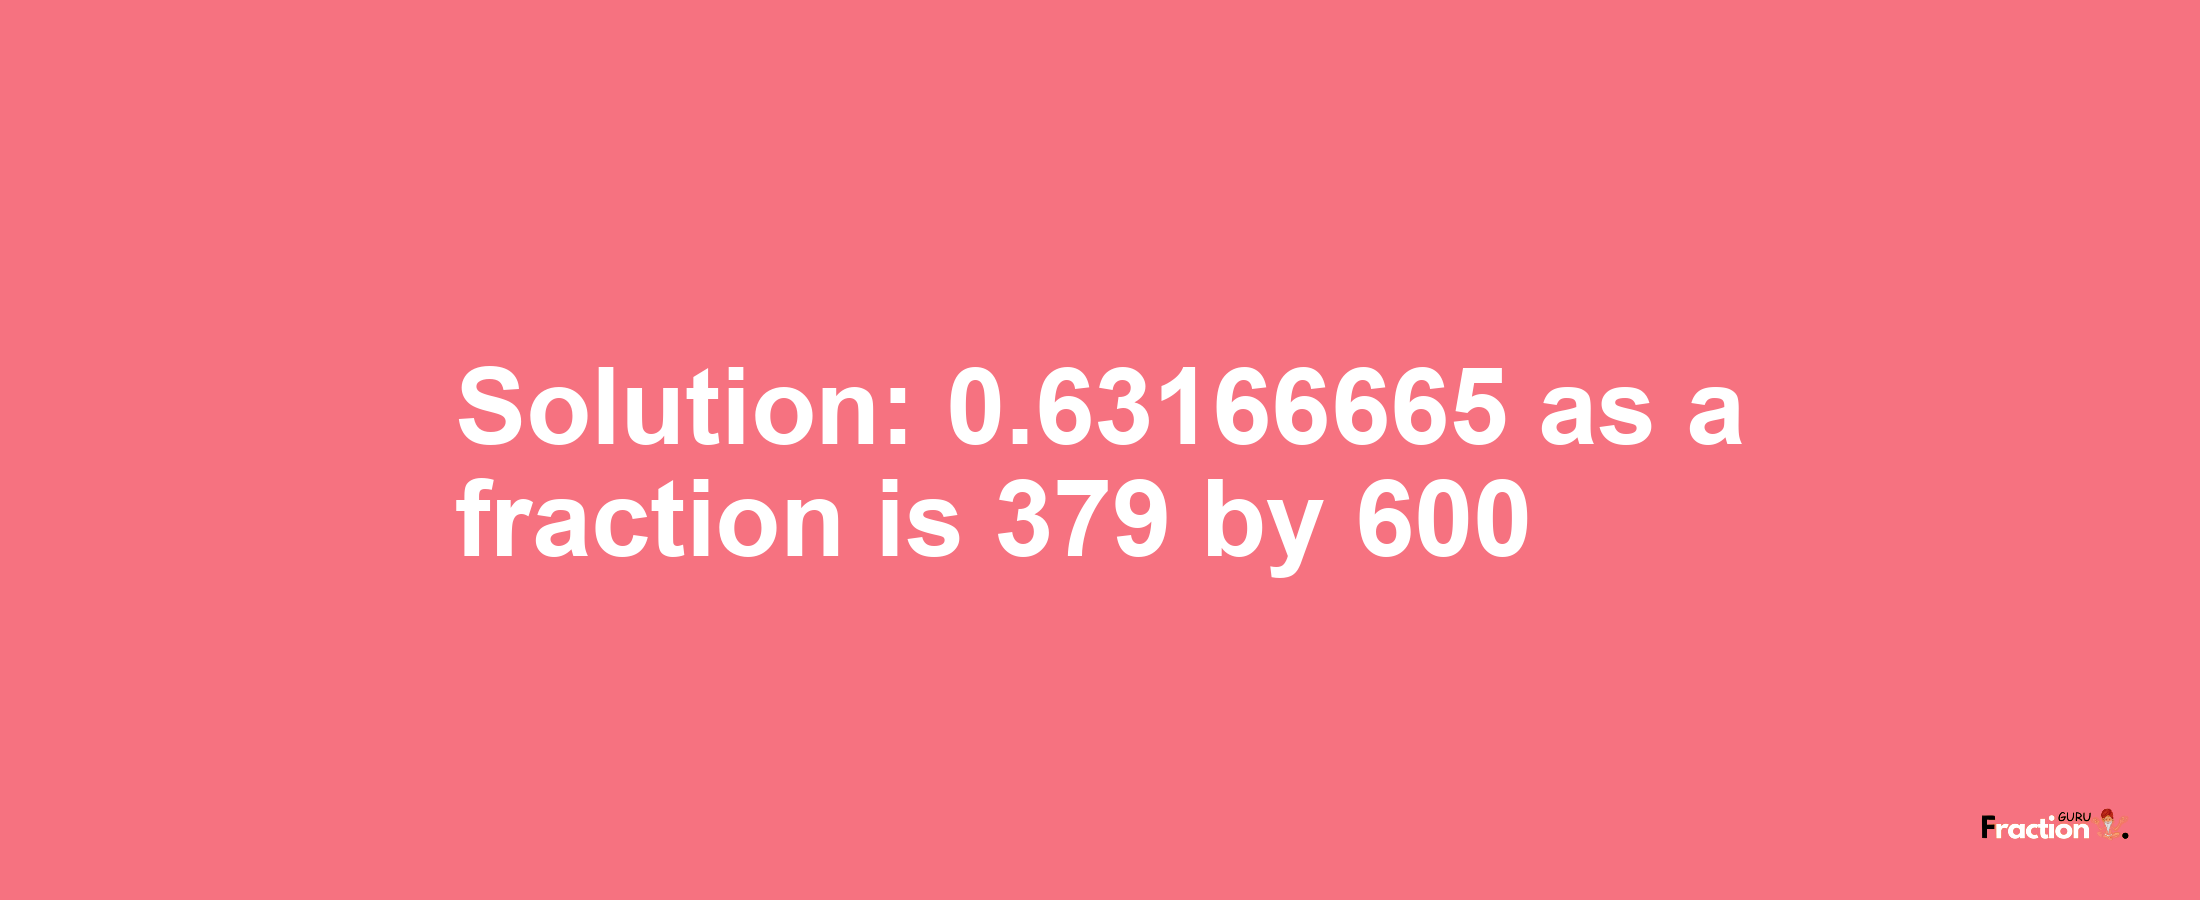 Solution:0.63166665 as a fraction is 379/600